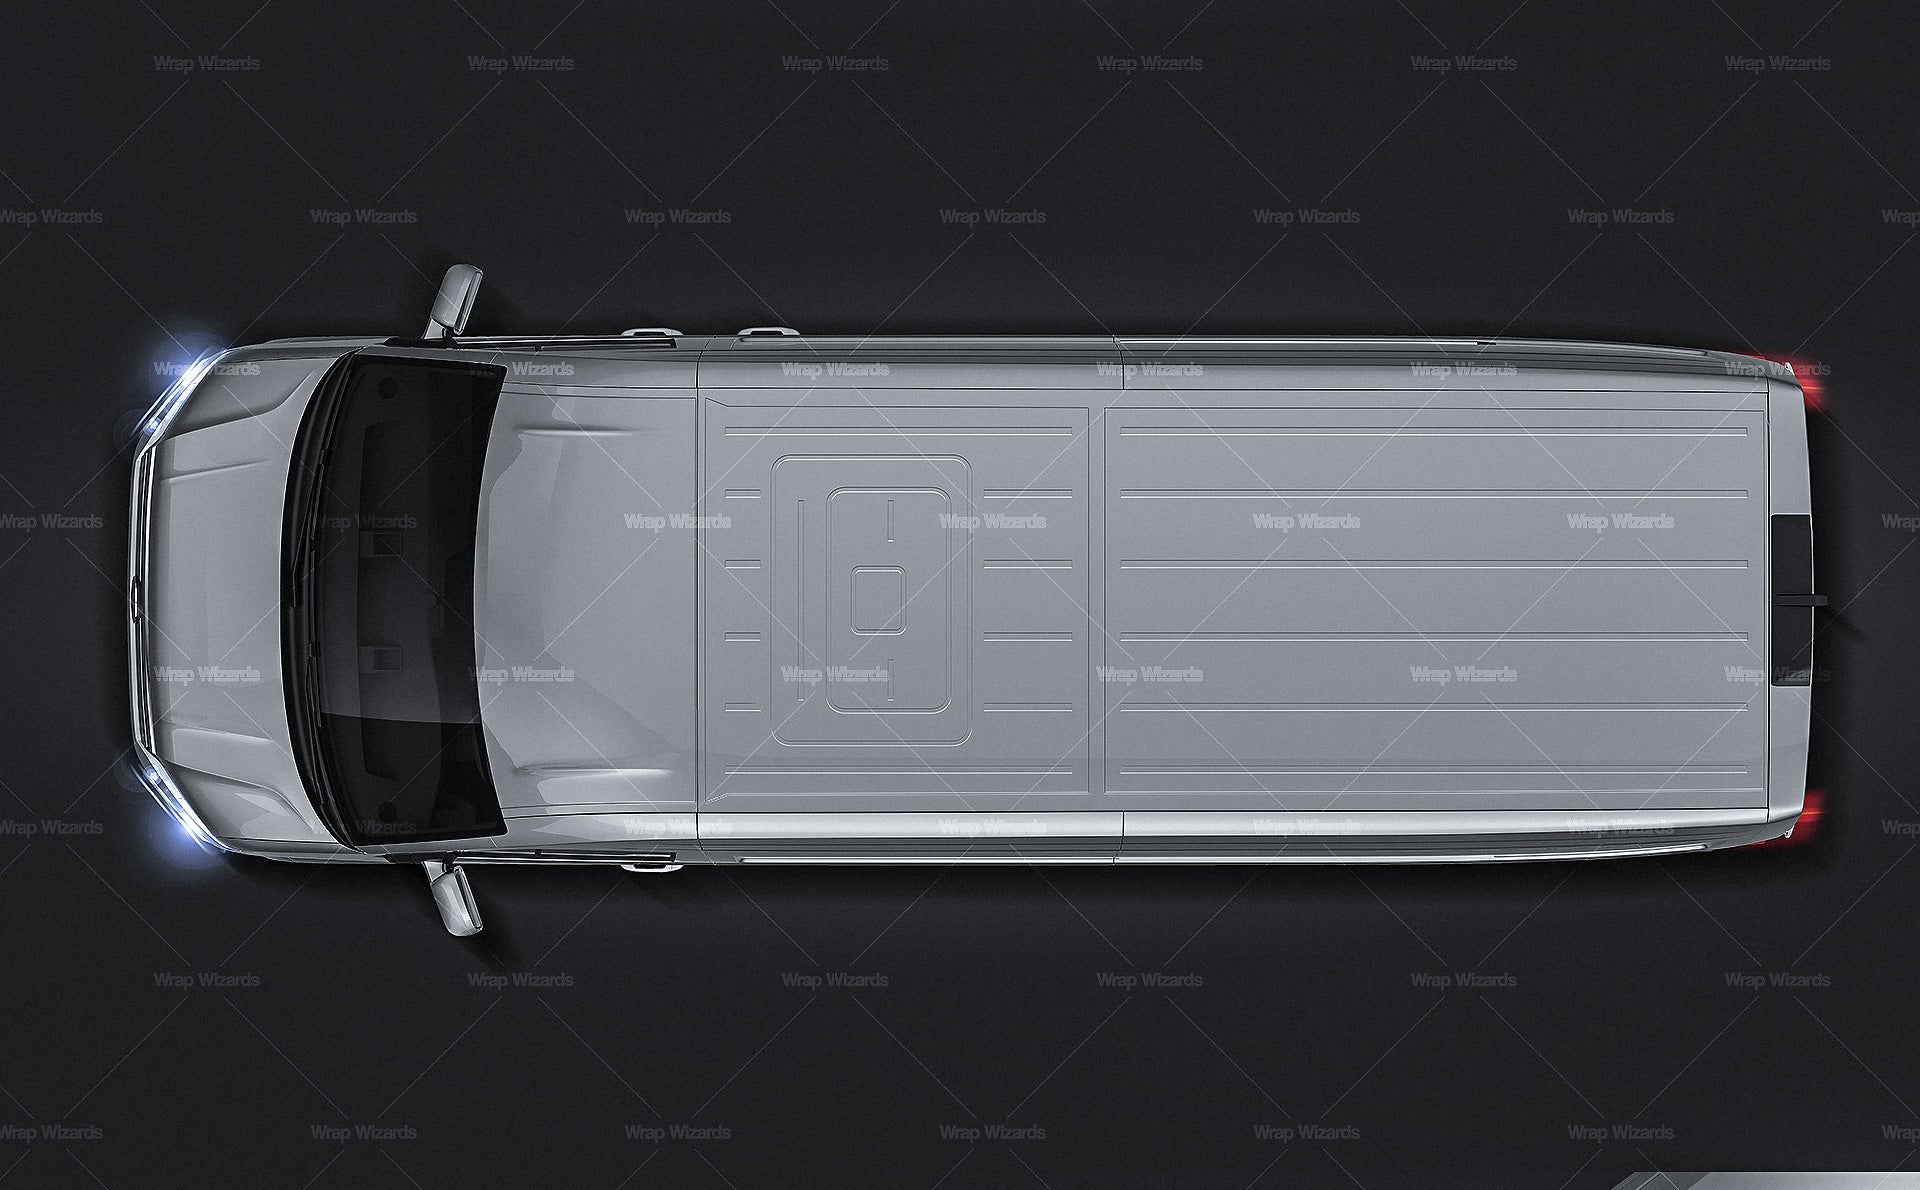 Volkswagen Crafter Long High Roof L2H2 2019 glossy finish - all sides Car Mockup Template.psd